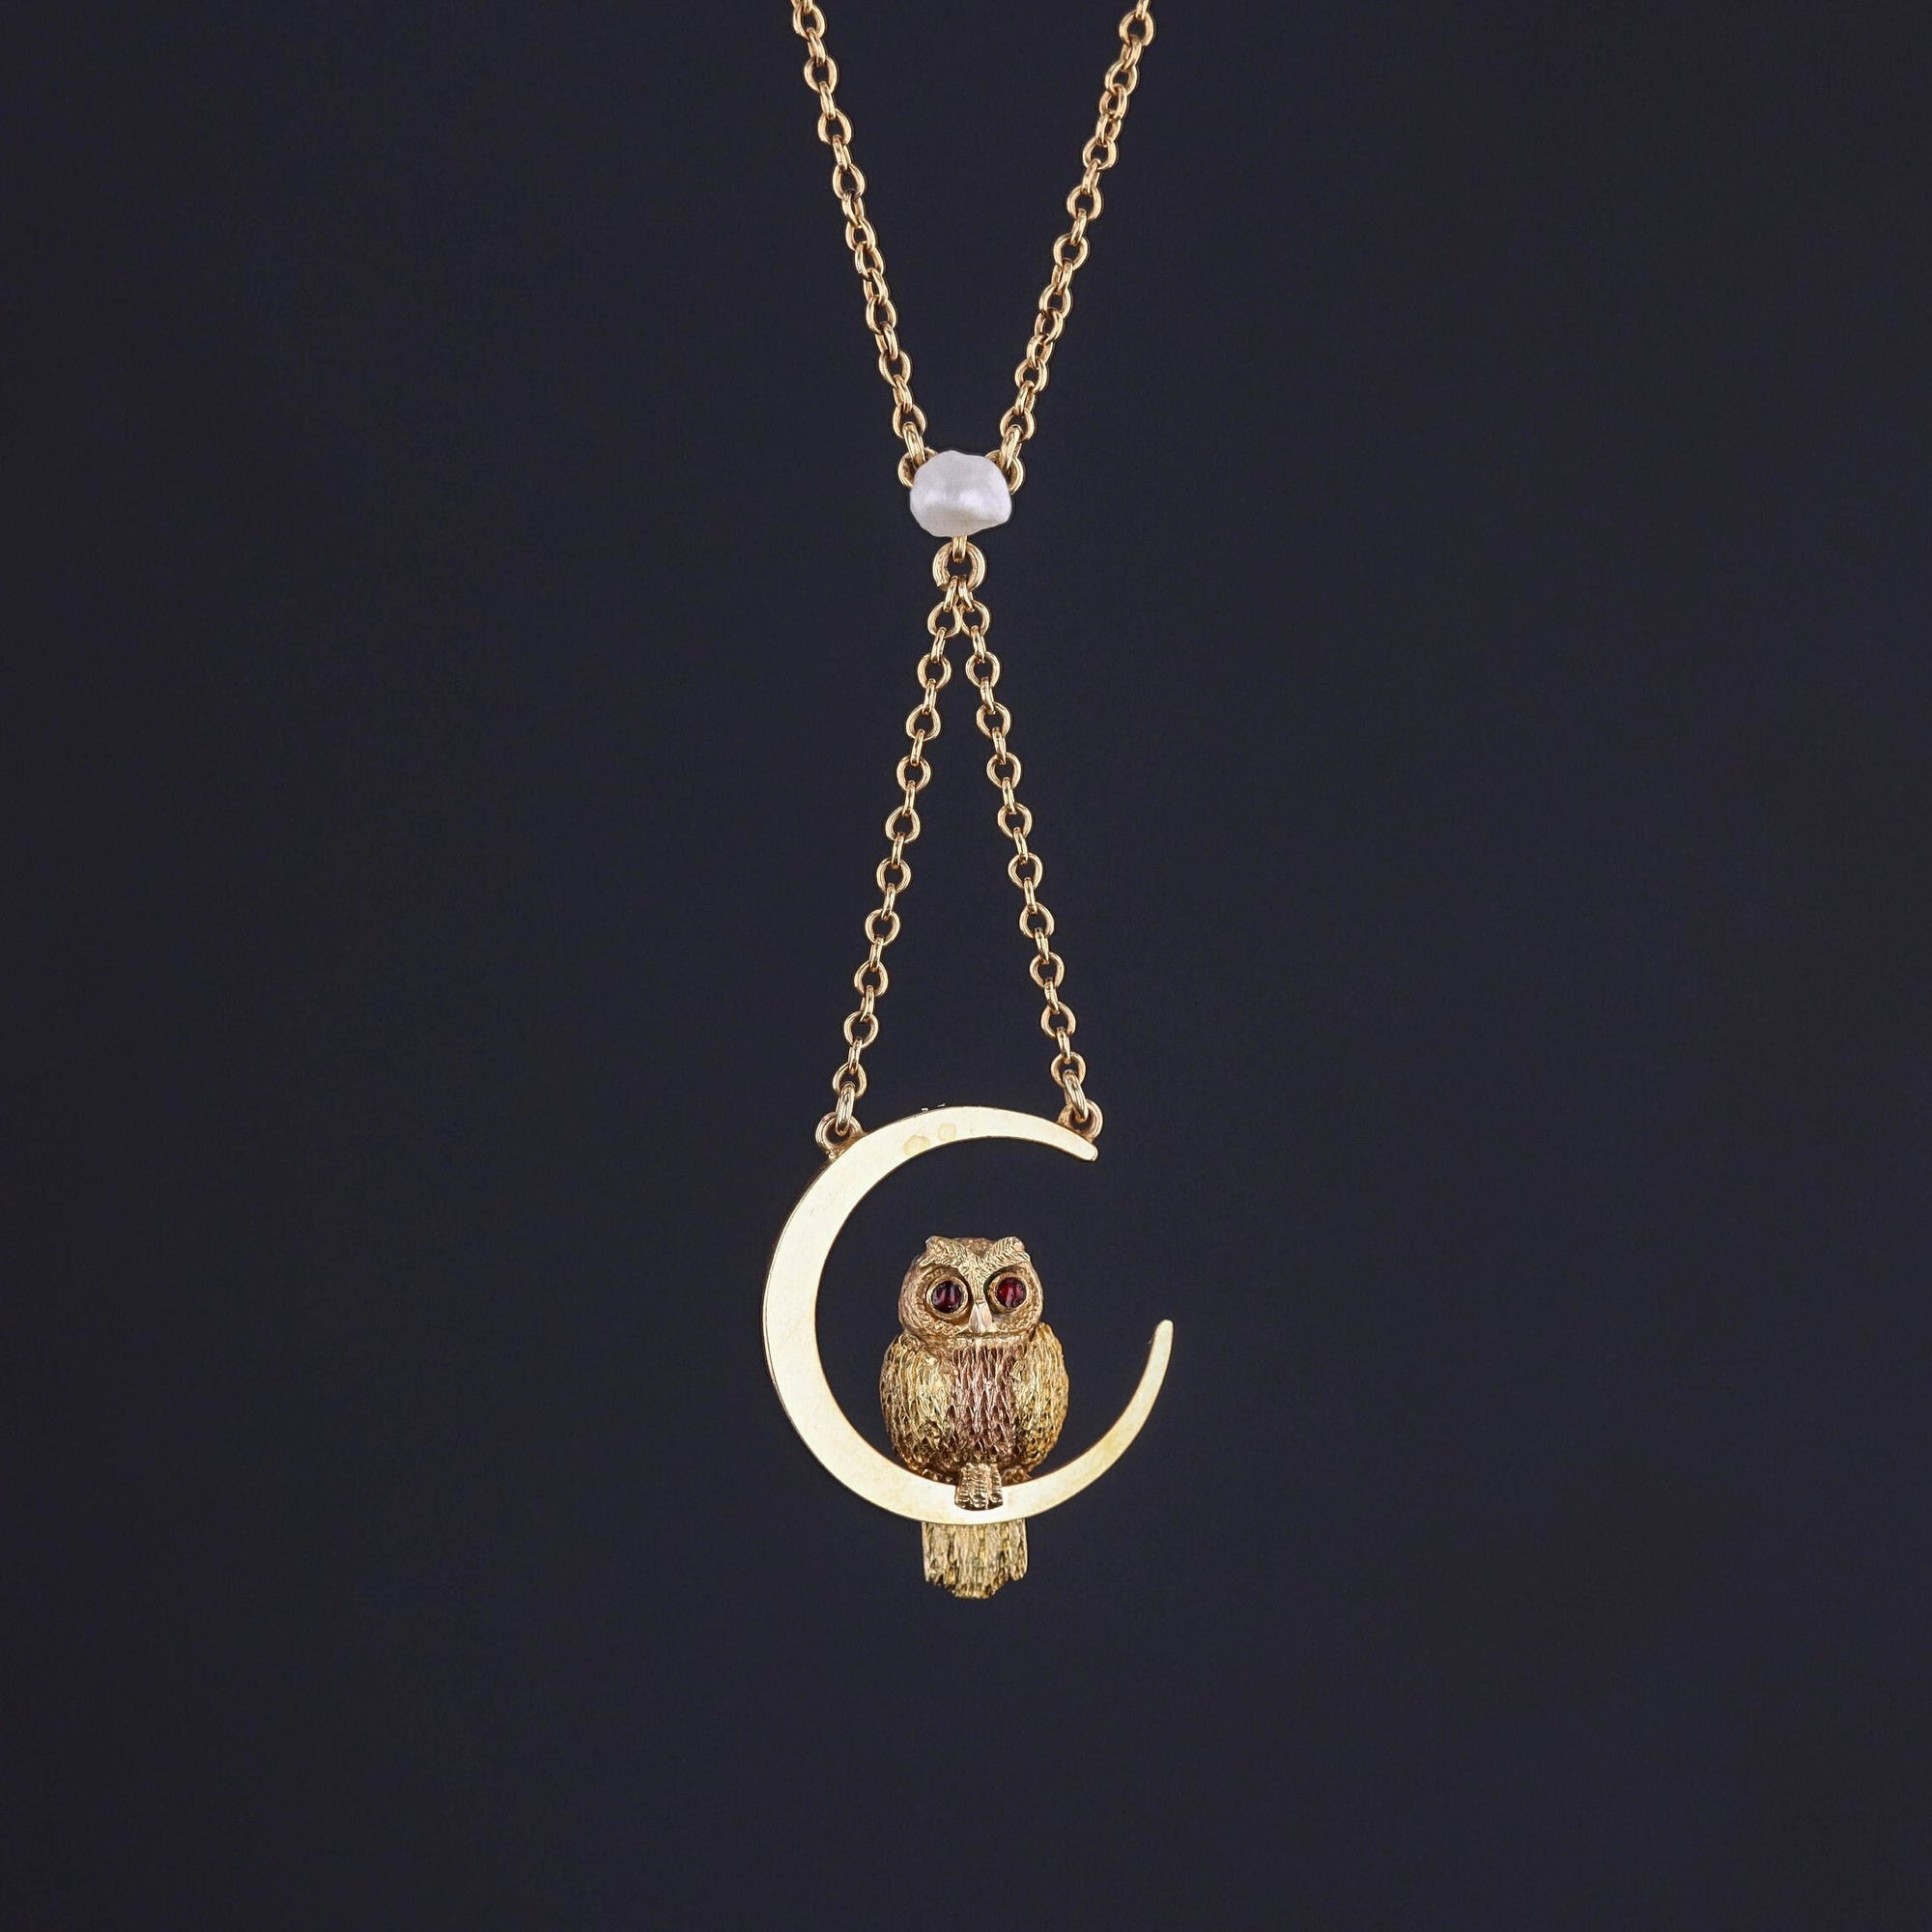 Antique Owl on Moon Necklace of 9ct Gold